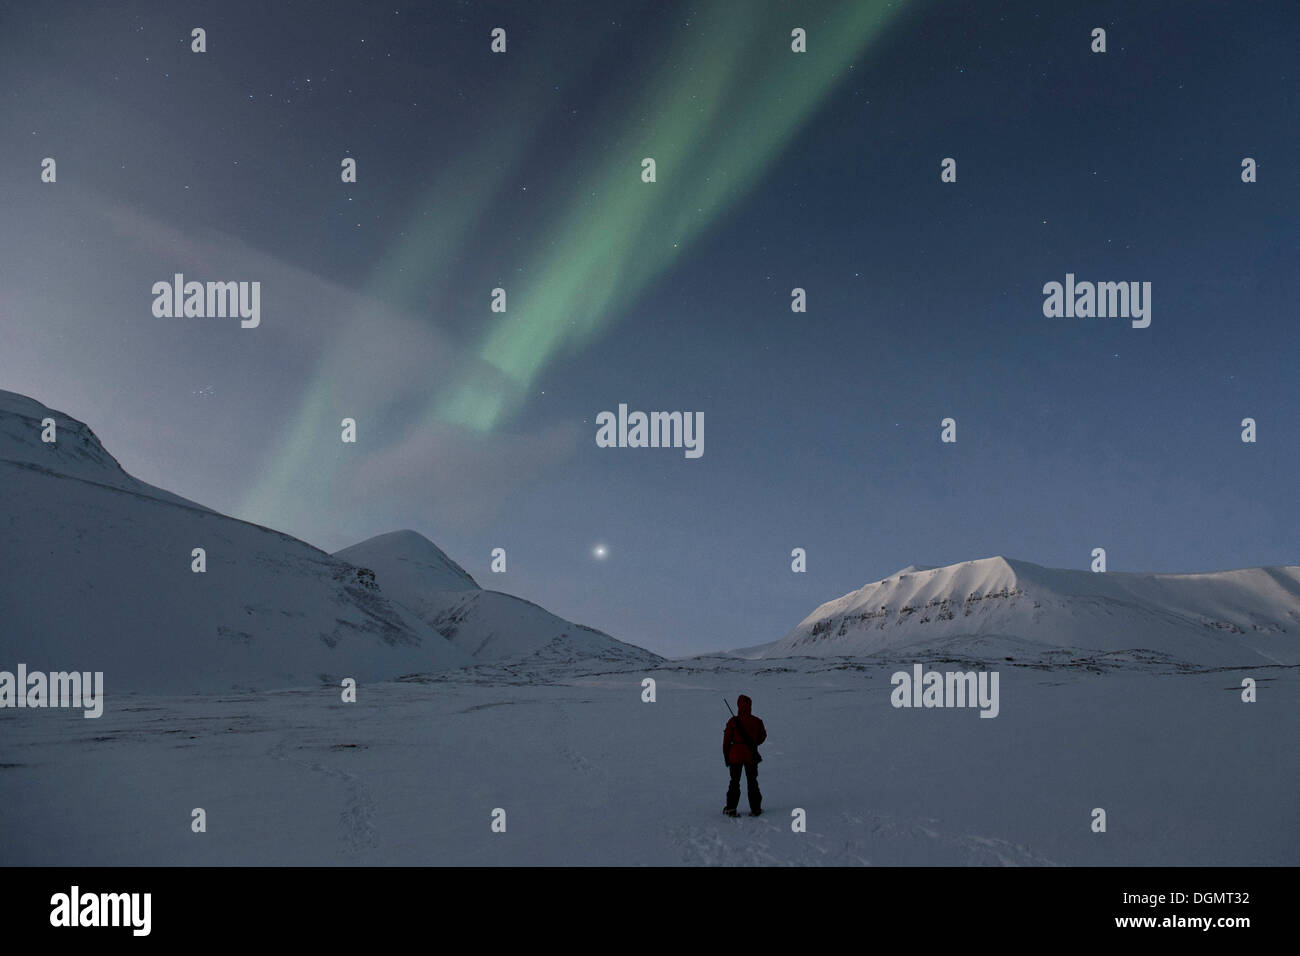 Person carrying a rifle is admiring the Northern lights and the starry sky, Spitsbergen, Svalbard, Norway, Europe Stock Photo